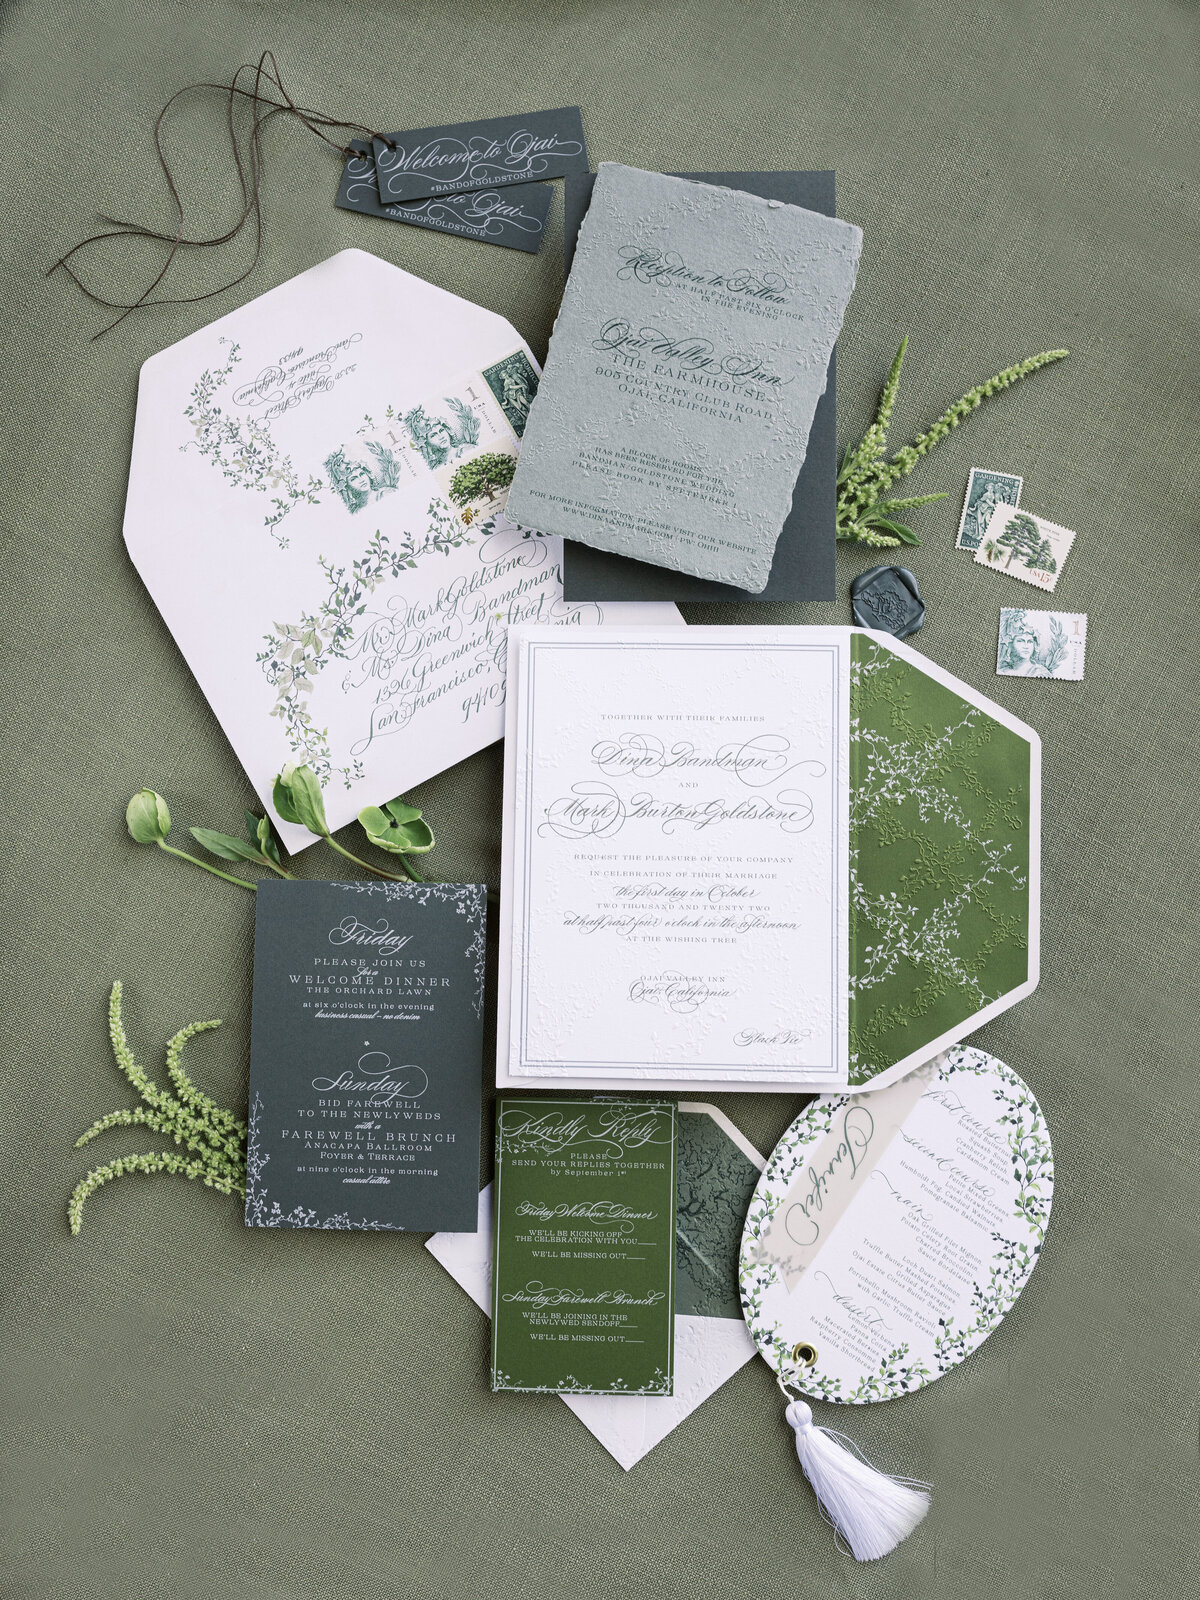 Teal, blue and green stationery suite for Santa Barbara Wedding with fresh greens and travel stamps